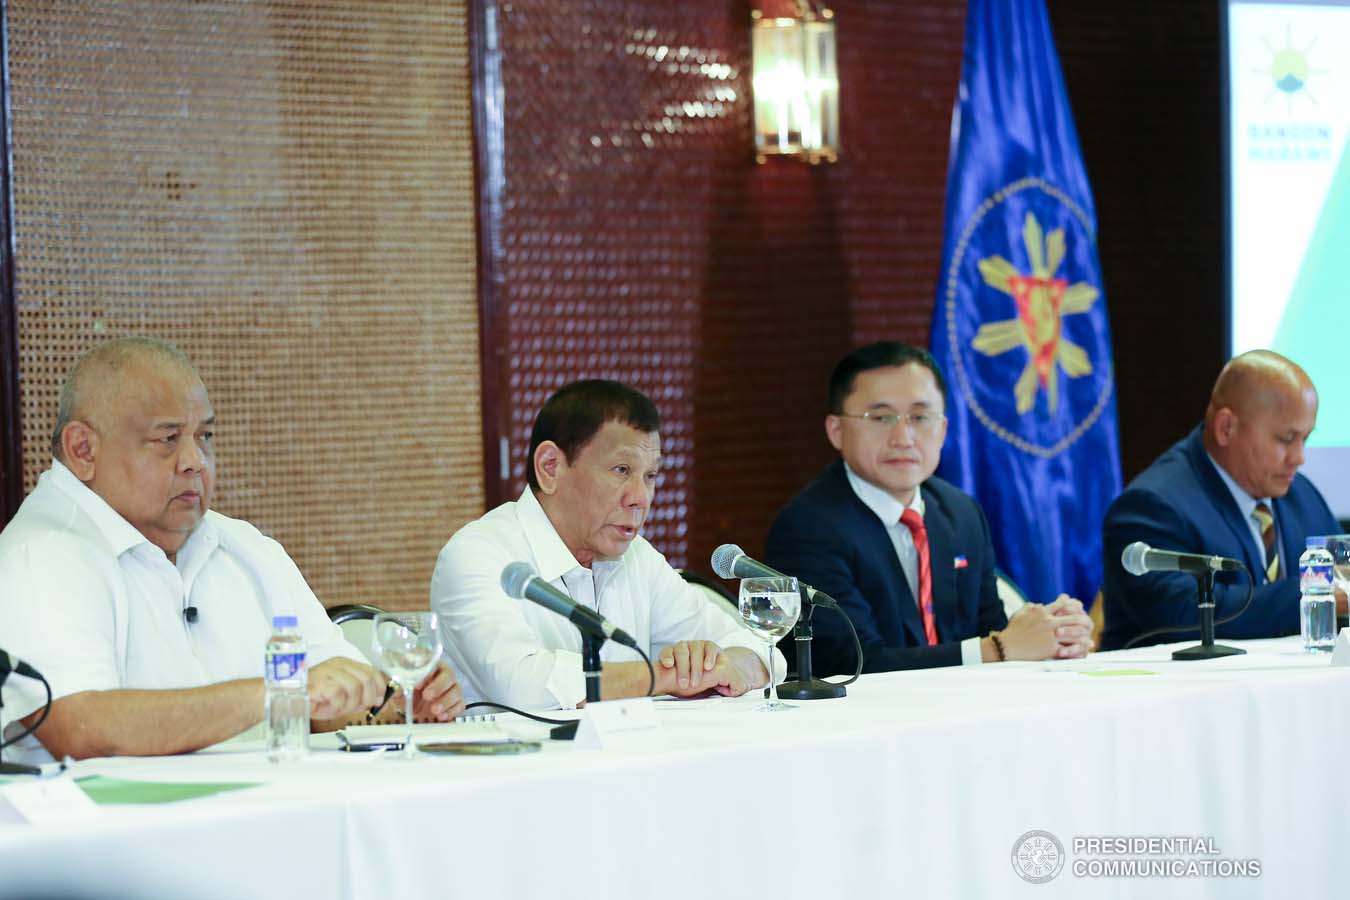 President Rodrigo Roa Duterte holds a meeting to discuss the updates on the Marawi Rehabilitation efforts at the Malacañan Palace on March 4, 2020. ALFRED FRIAS/PRESIDENTIAL